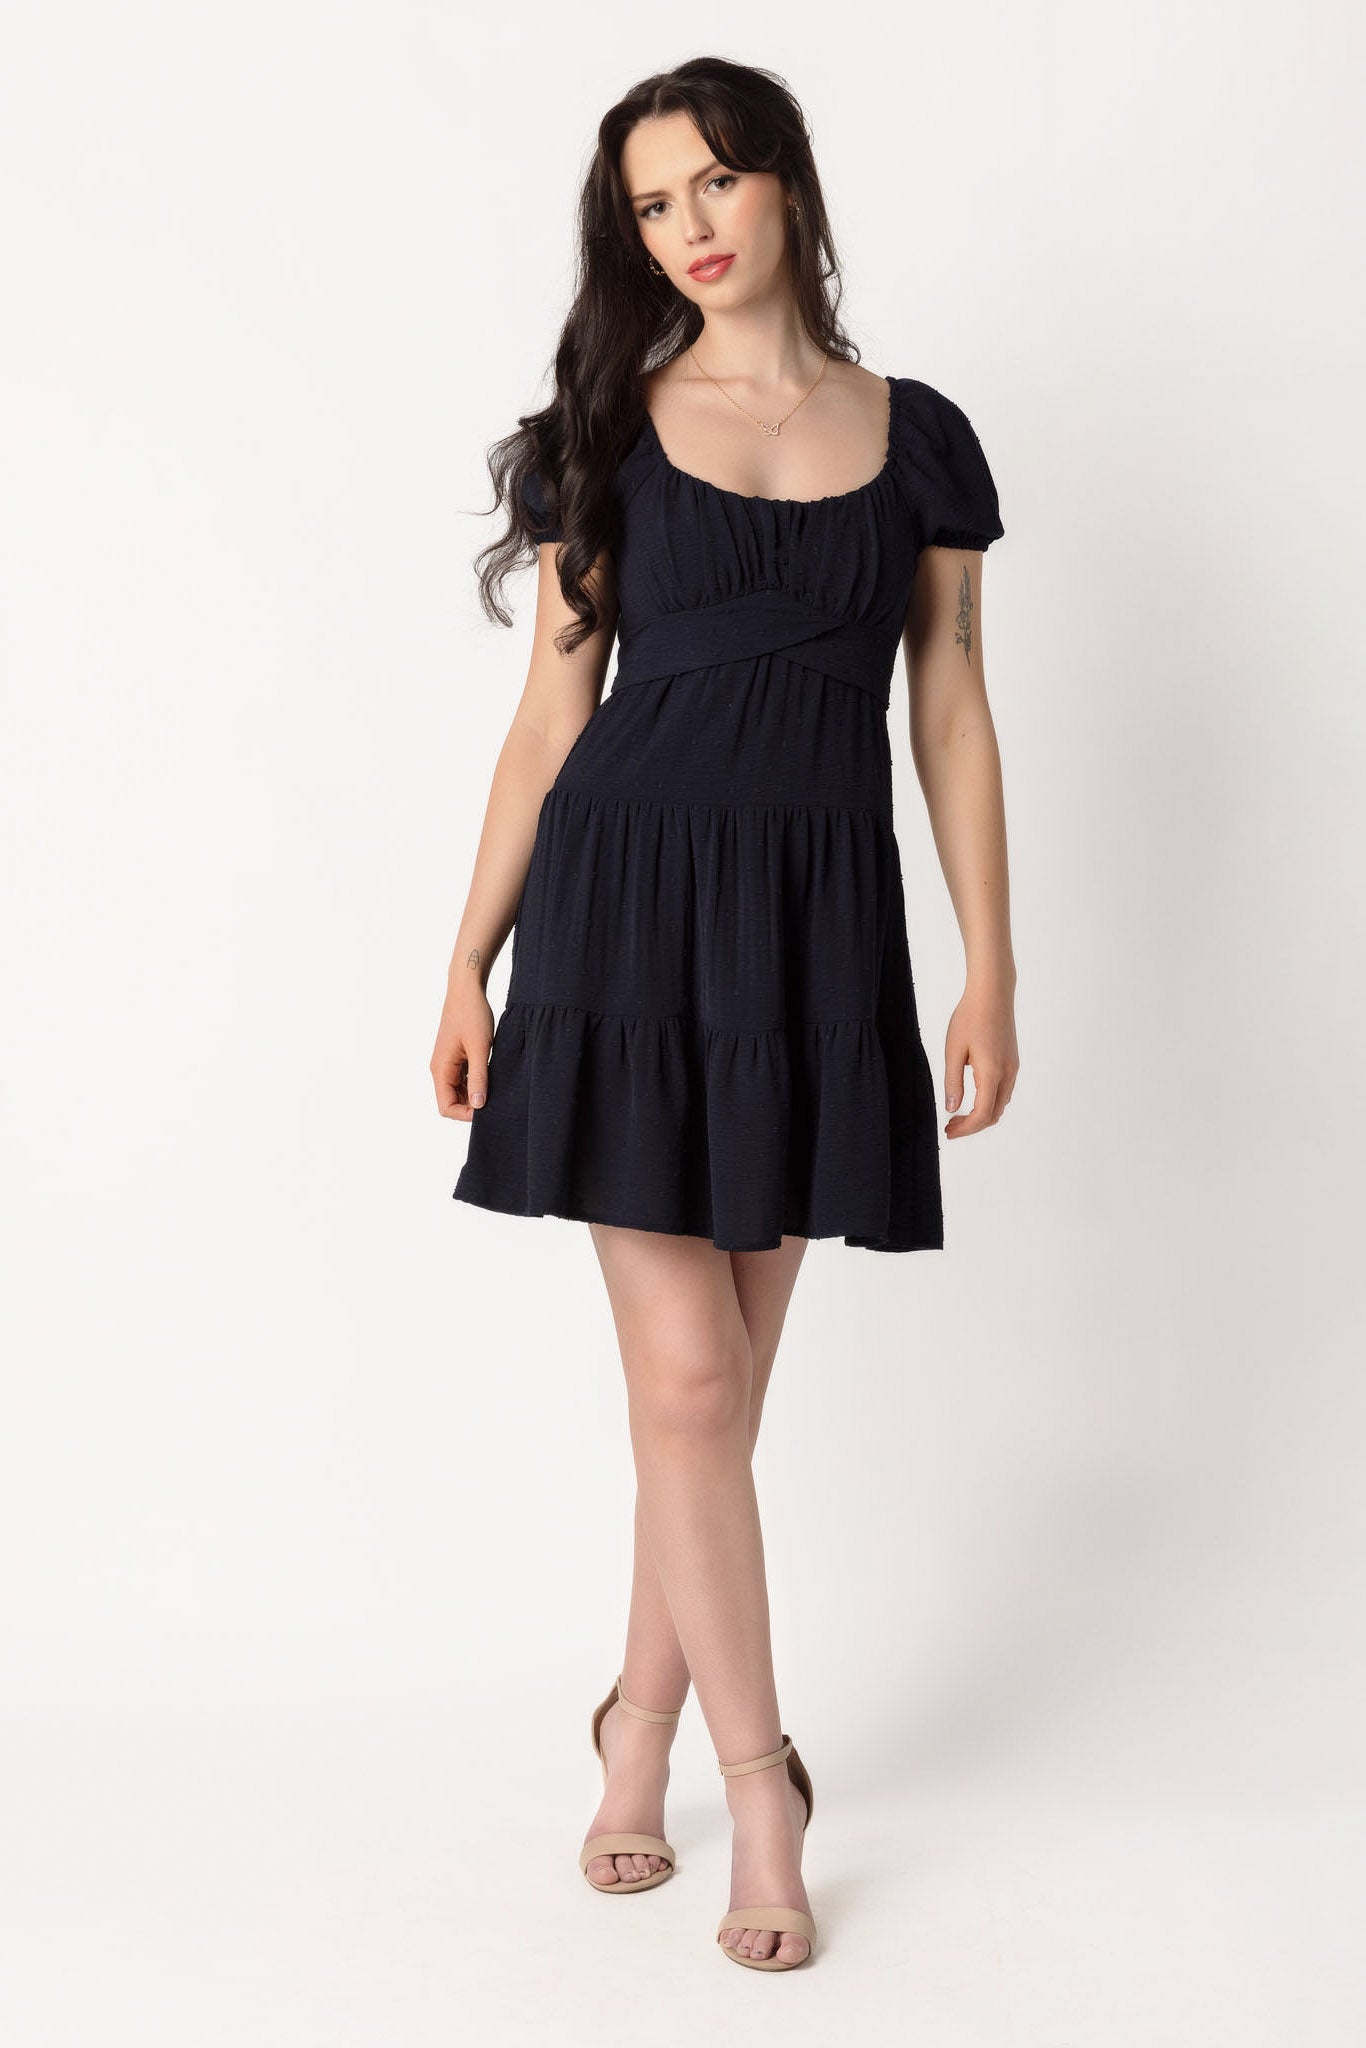 Airflow Swiss Dot Peasant Dress with Tie-Back